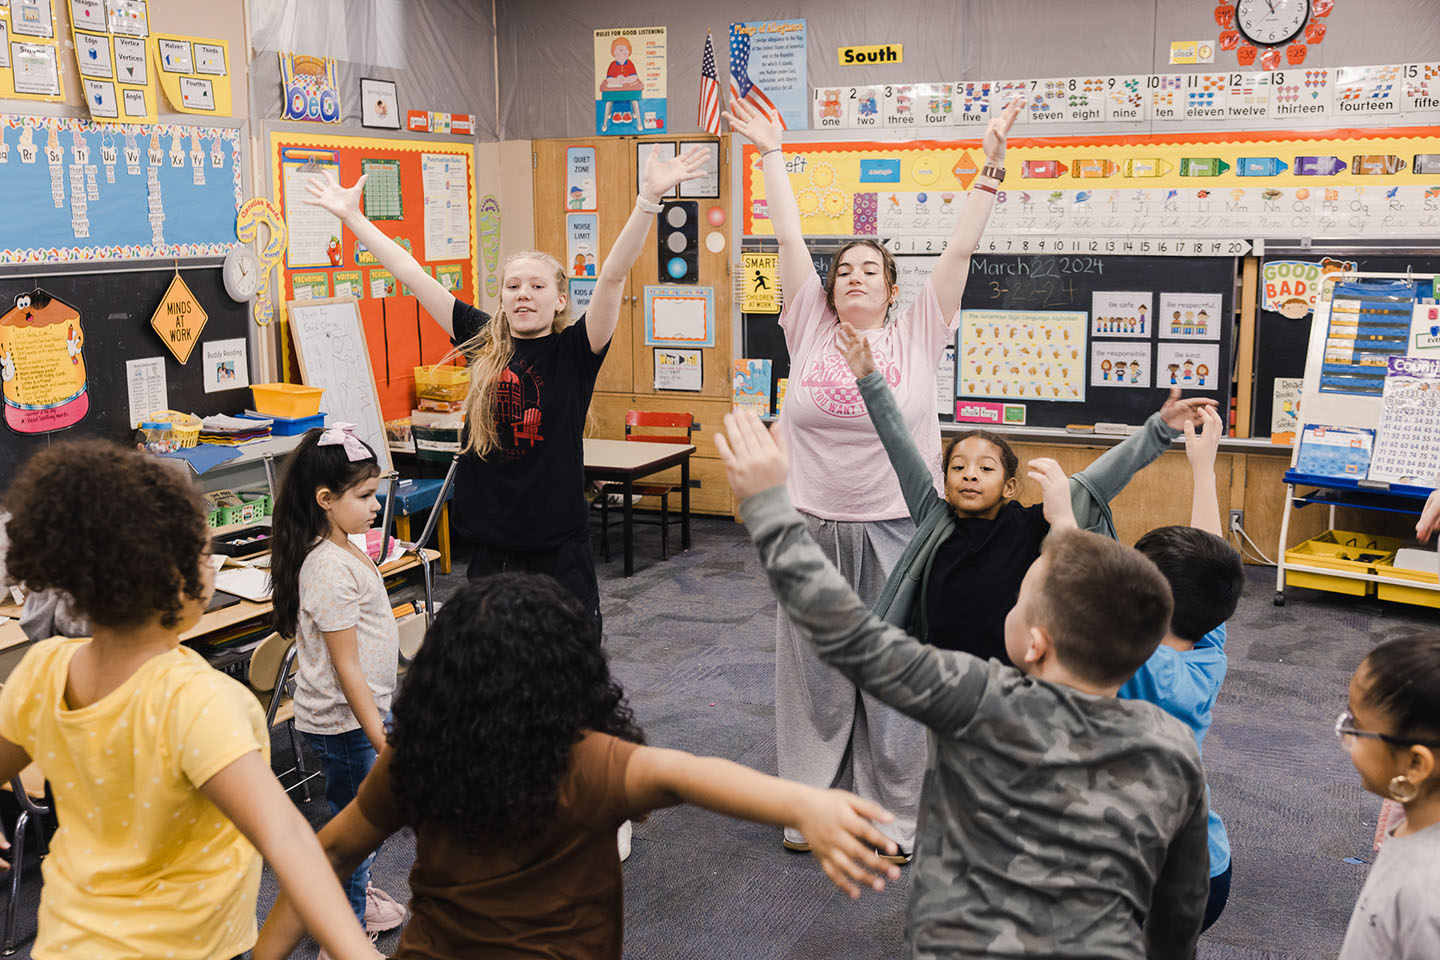 Two college students in a second grade classroom lead the kids in a dance